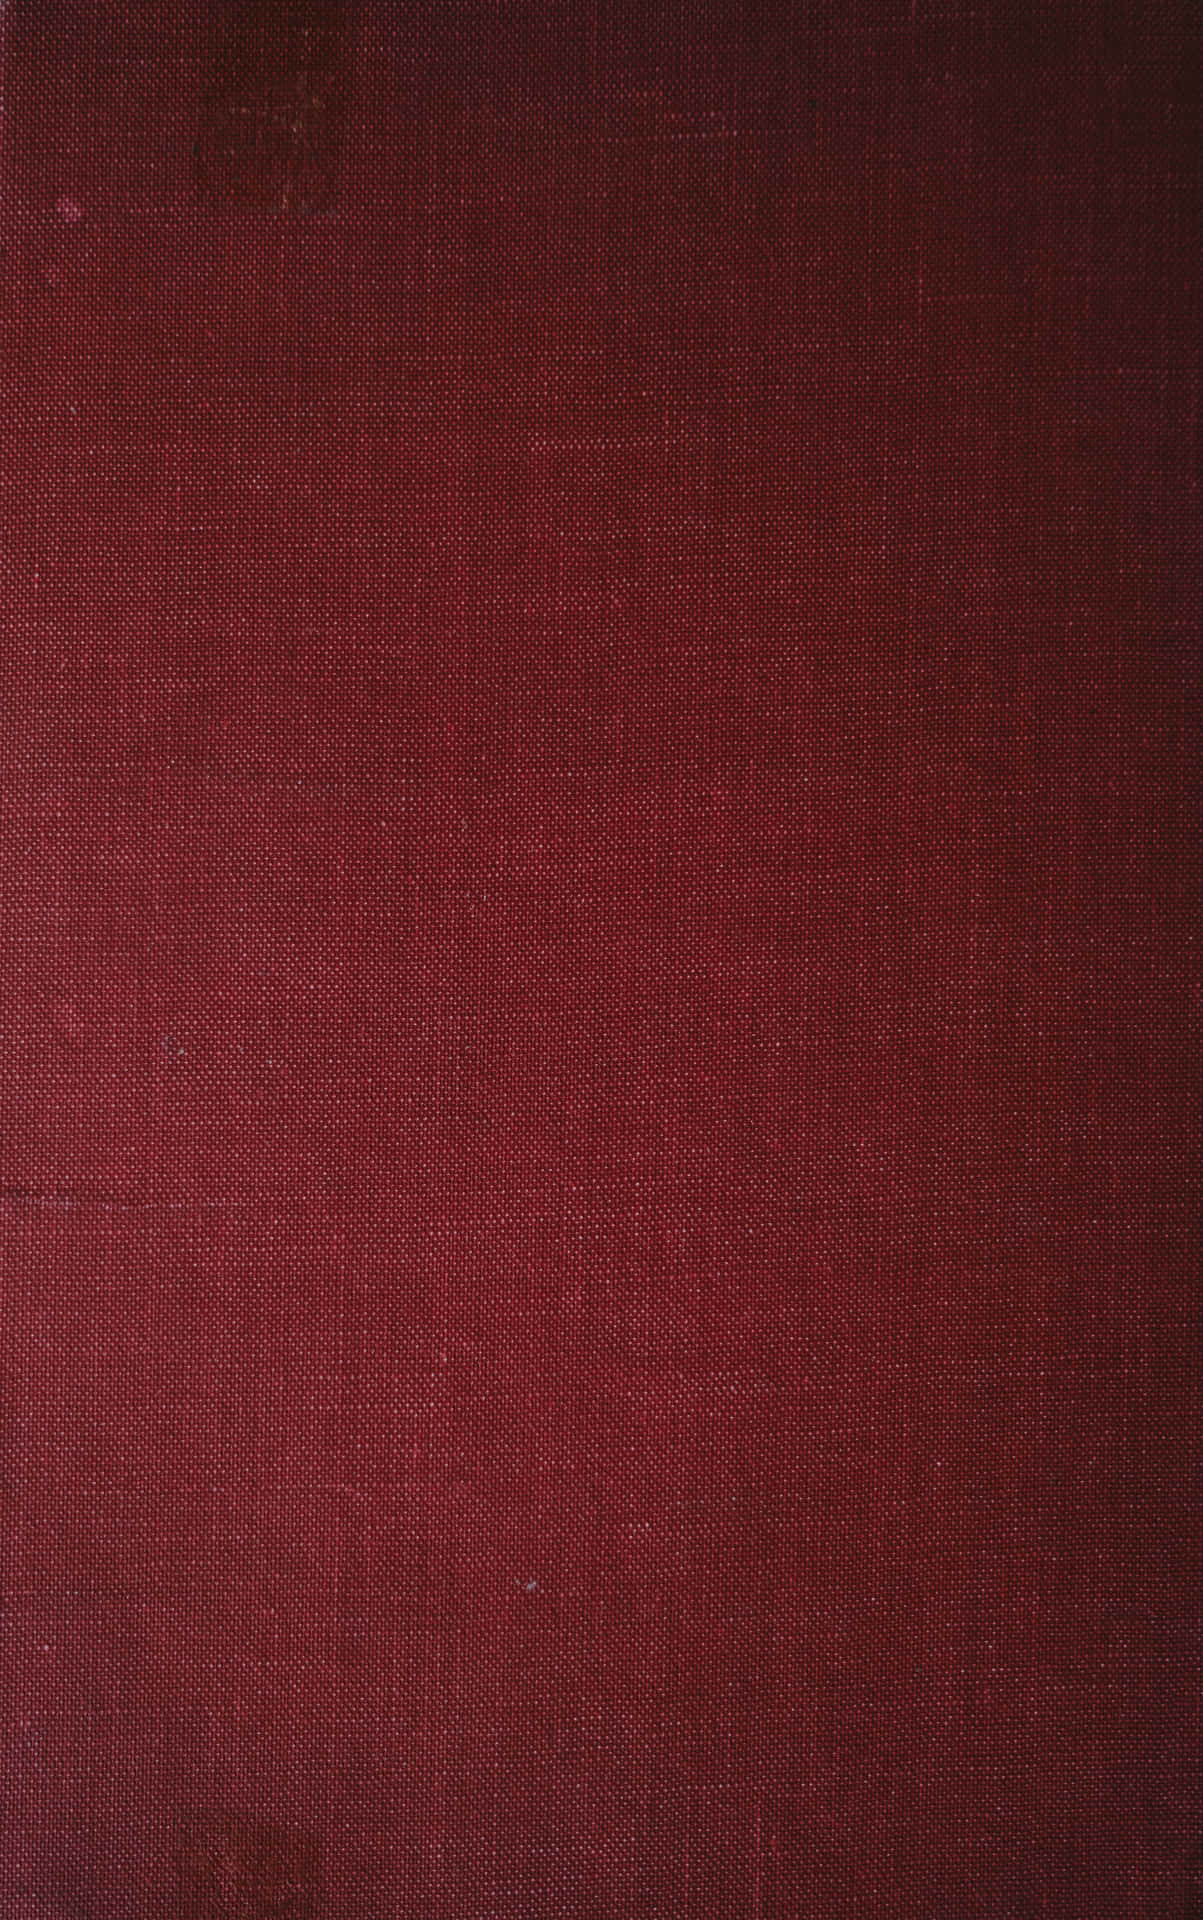 Maroon Fabric Cloth Color Background